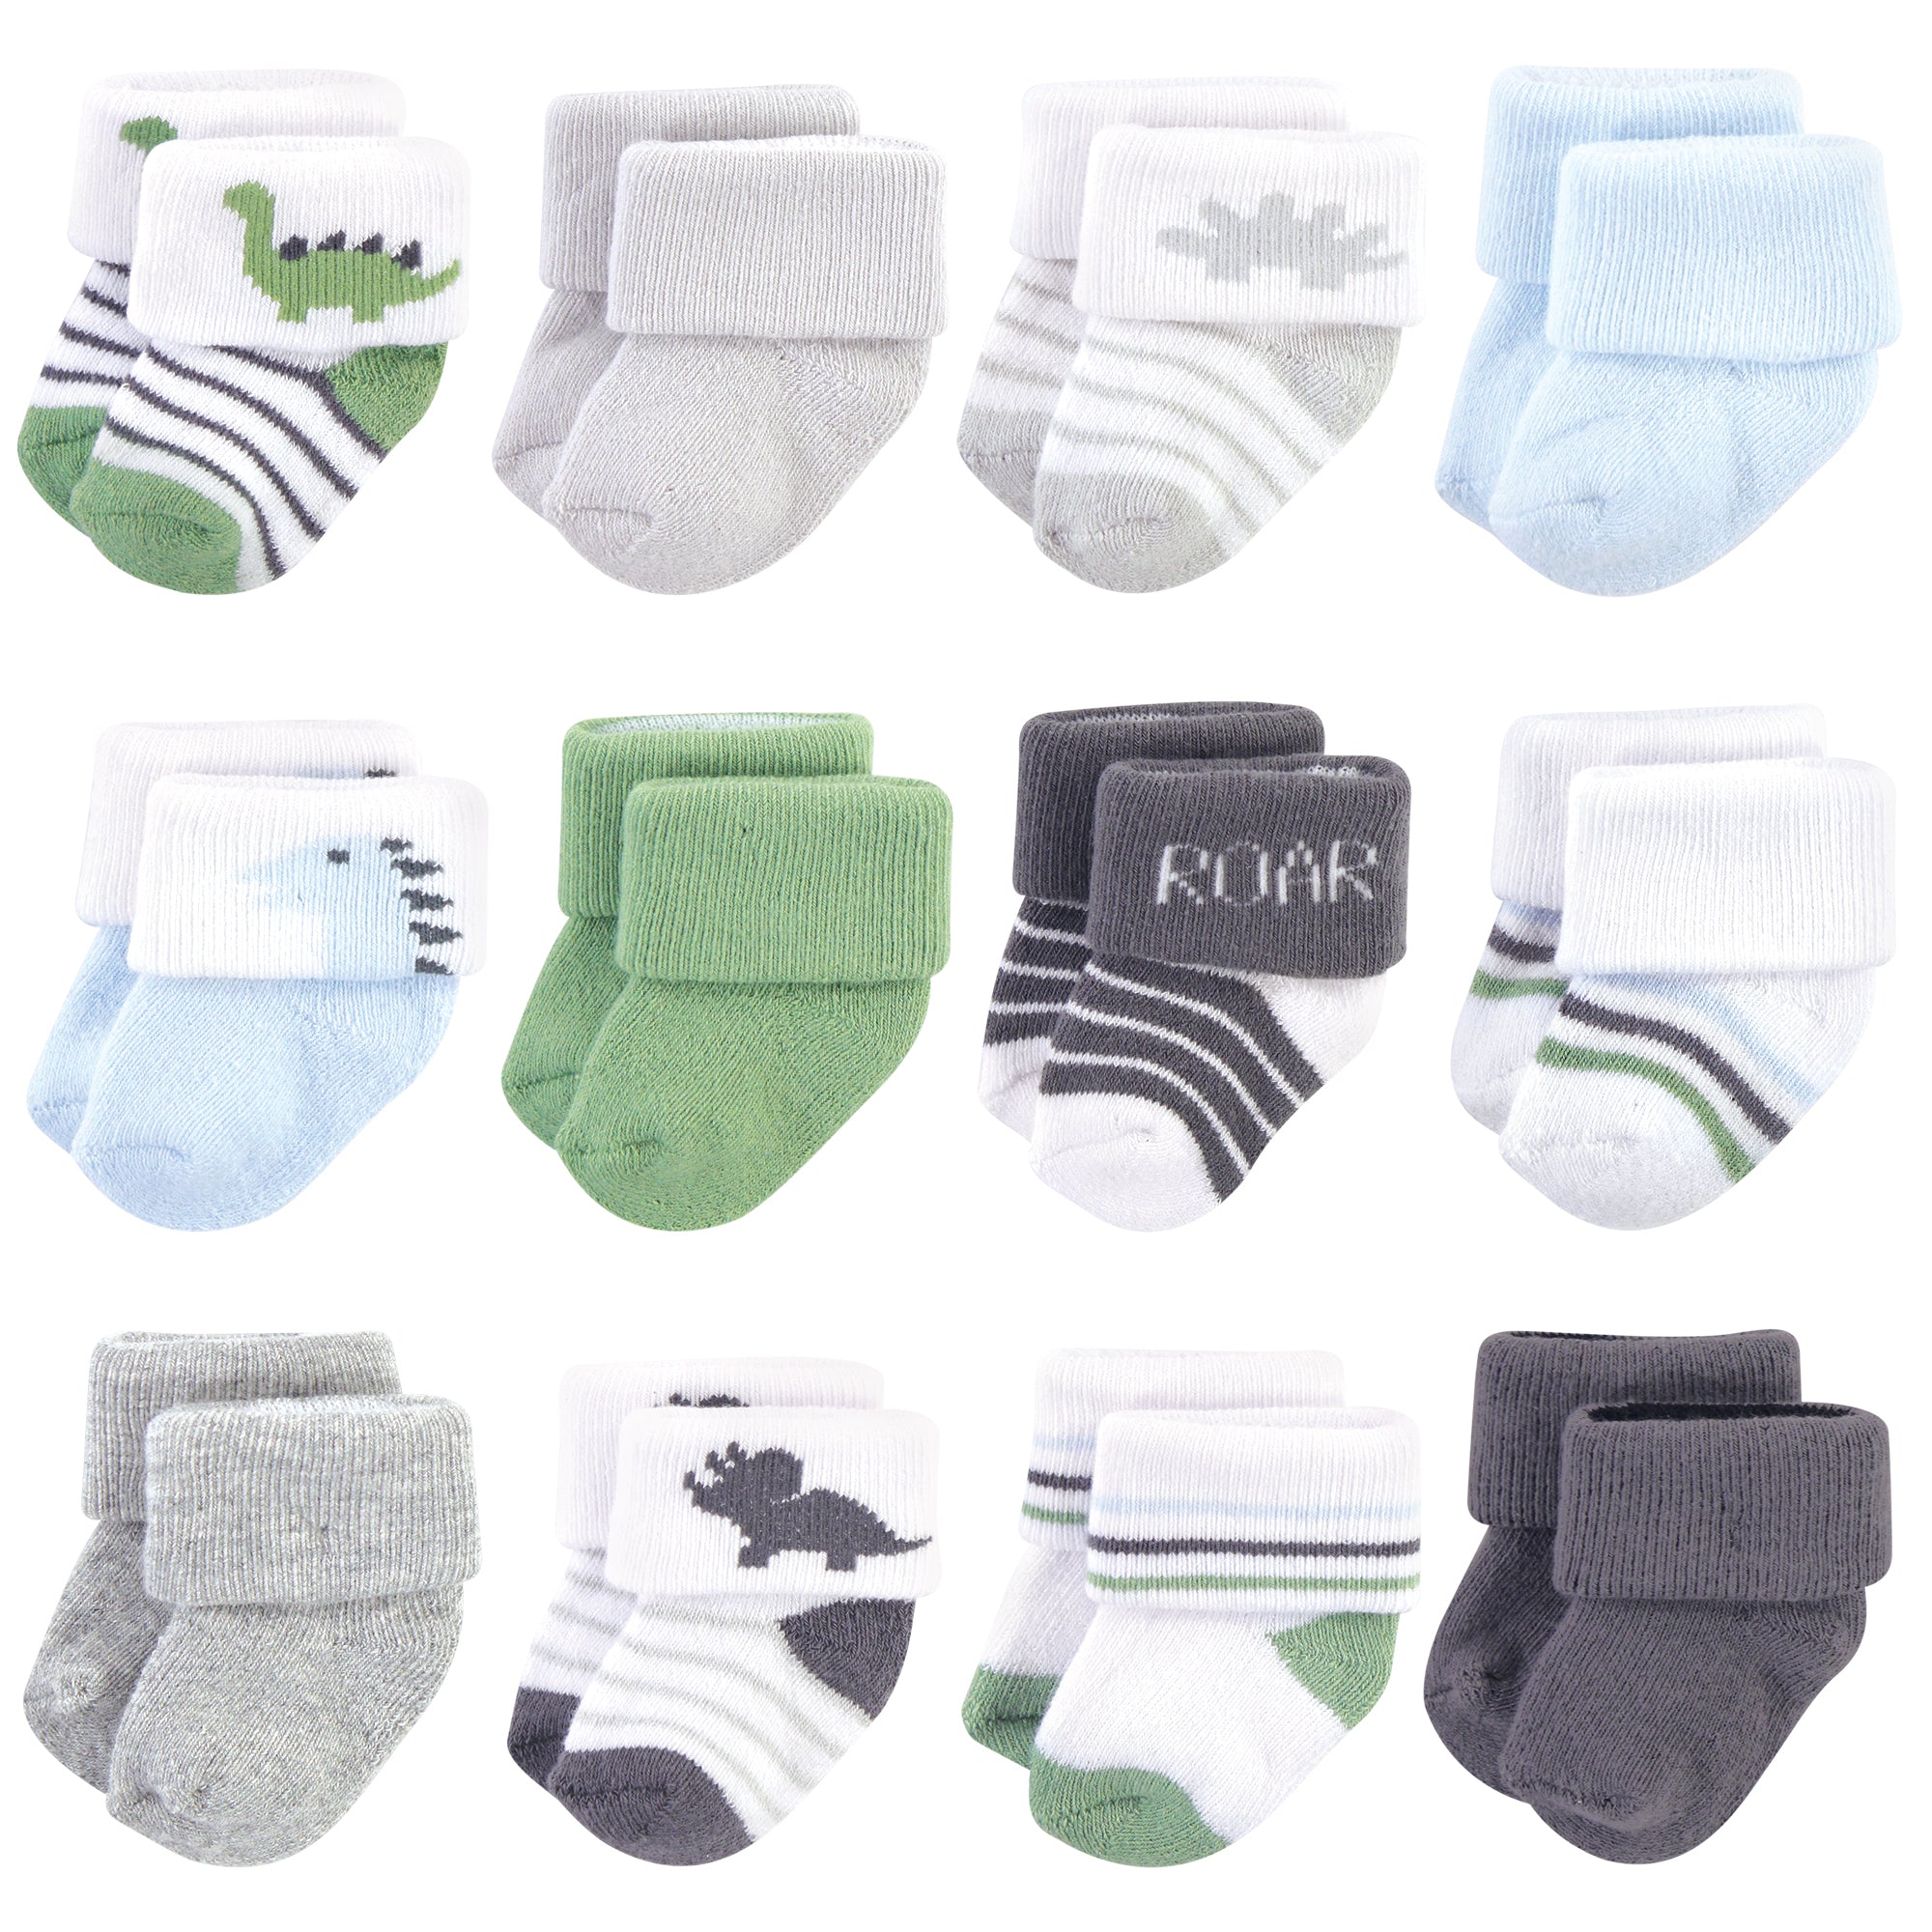 Luvable Friends Baby Boy Newborn and Baby Socks Set, Blue Gray Sneakers,  0-3 Months